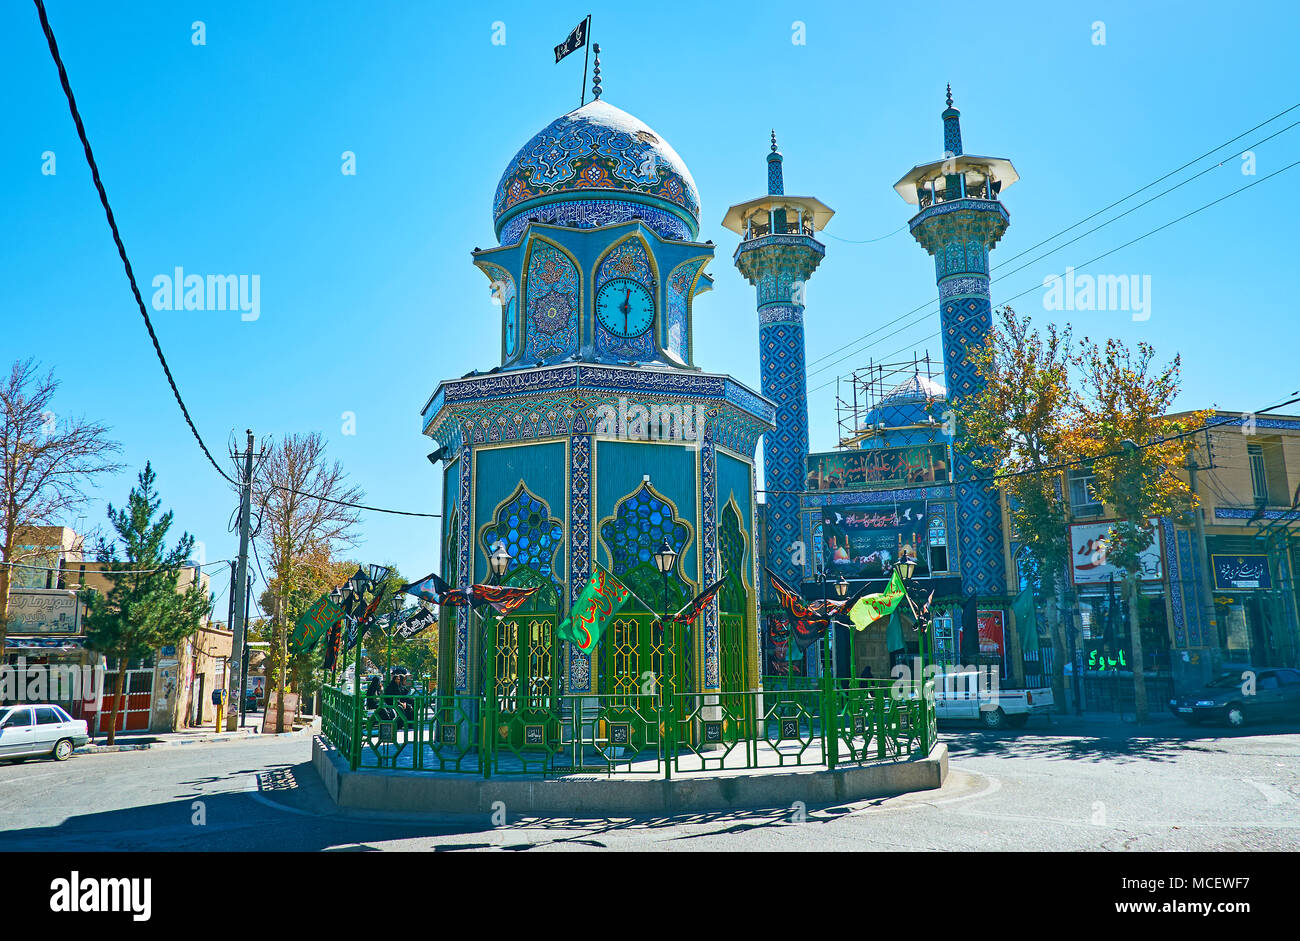 RAYEN, IRAN - OCTOTBER 16, 2017: The circular traffic in Inqilab (Revolution) square with Shia Shrine to Martyr of Iran-Iraq War in the middle and Jam Stock Photo